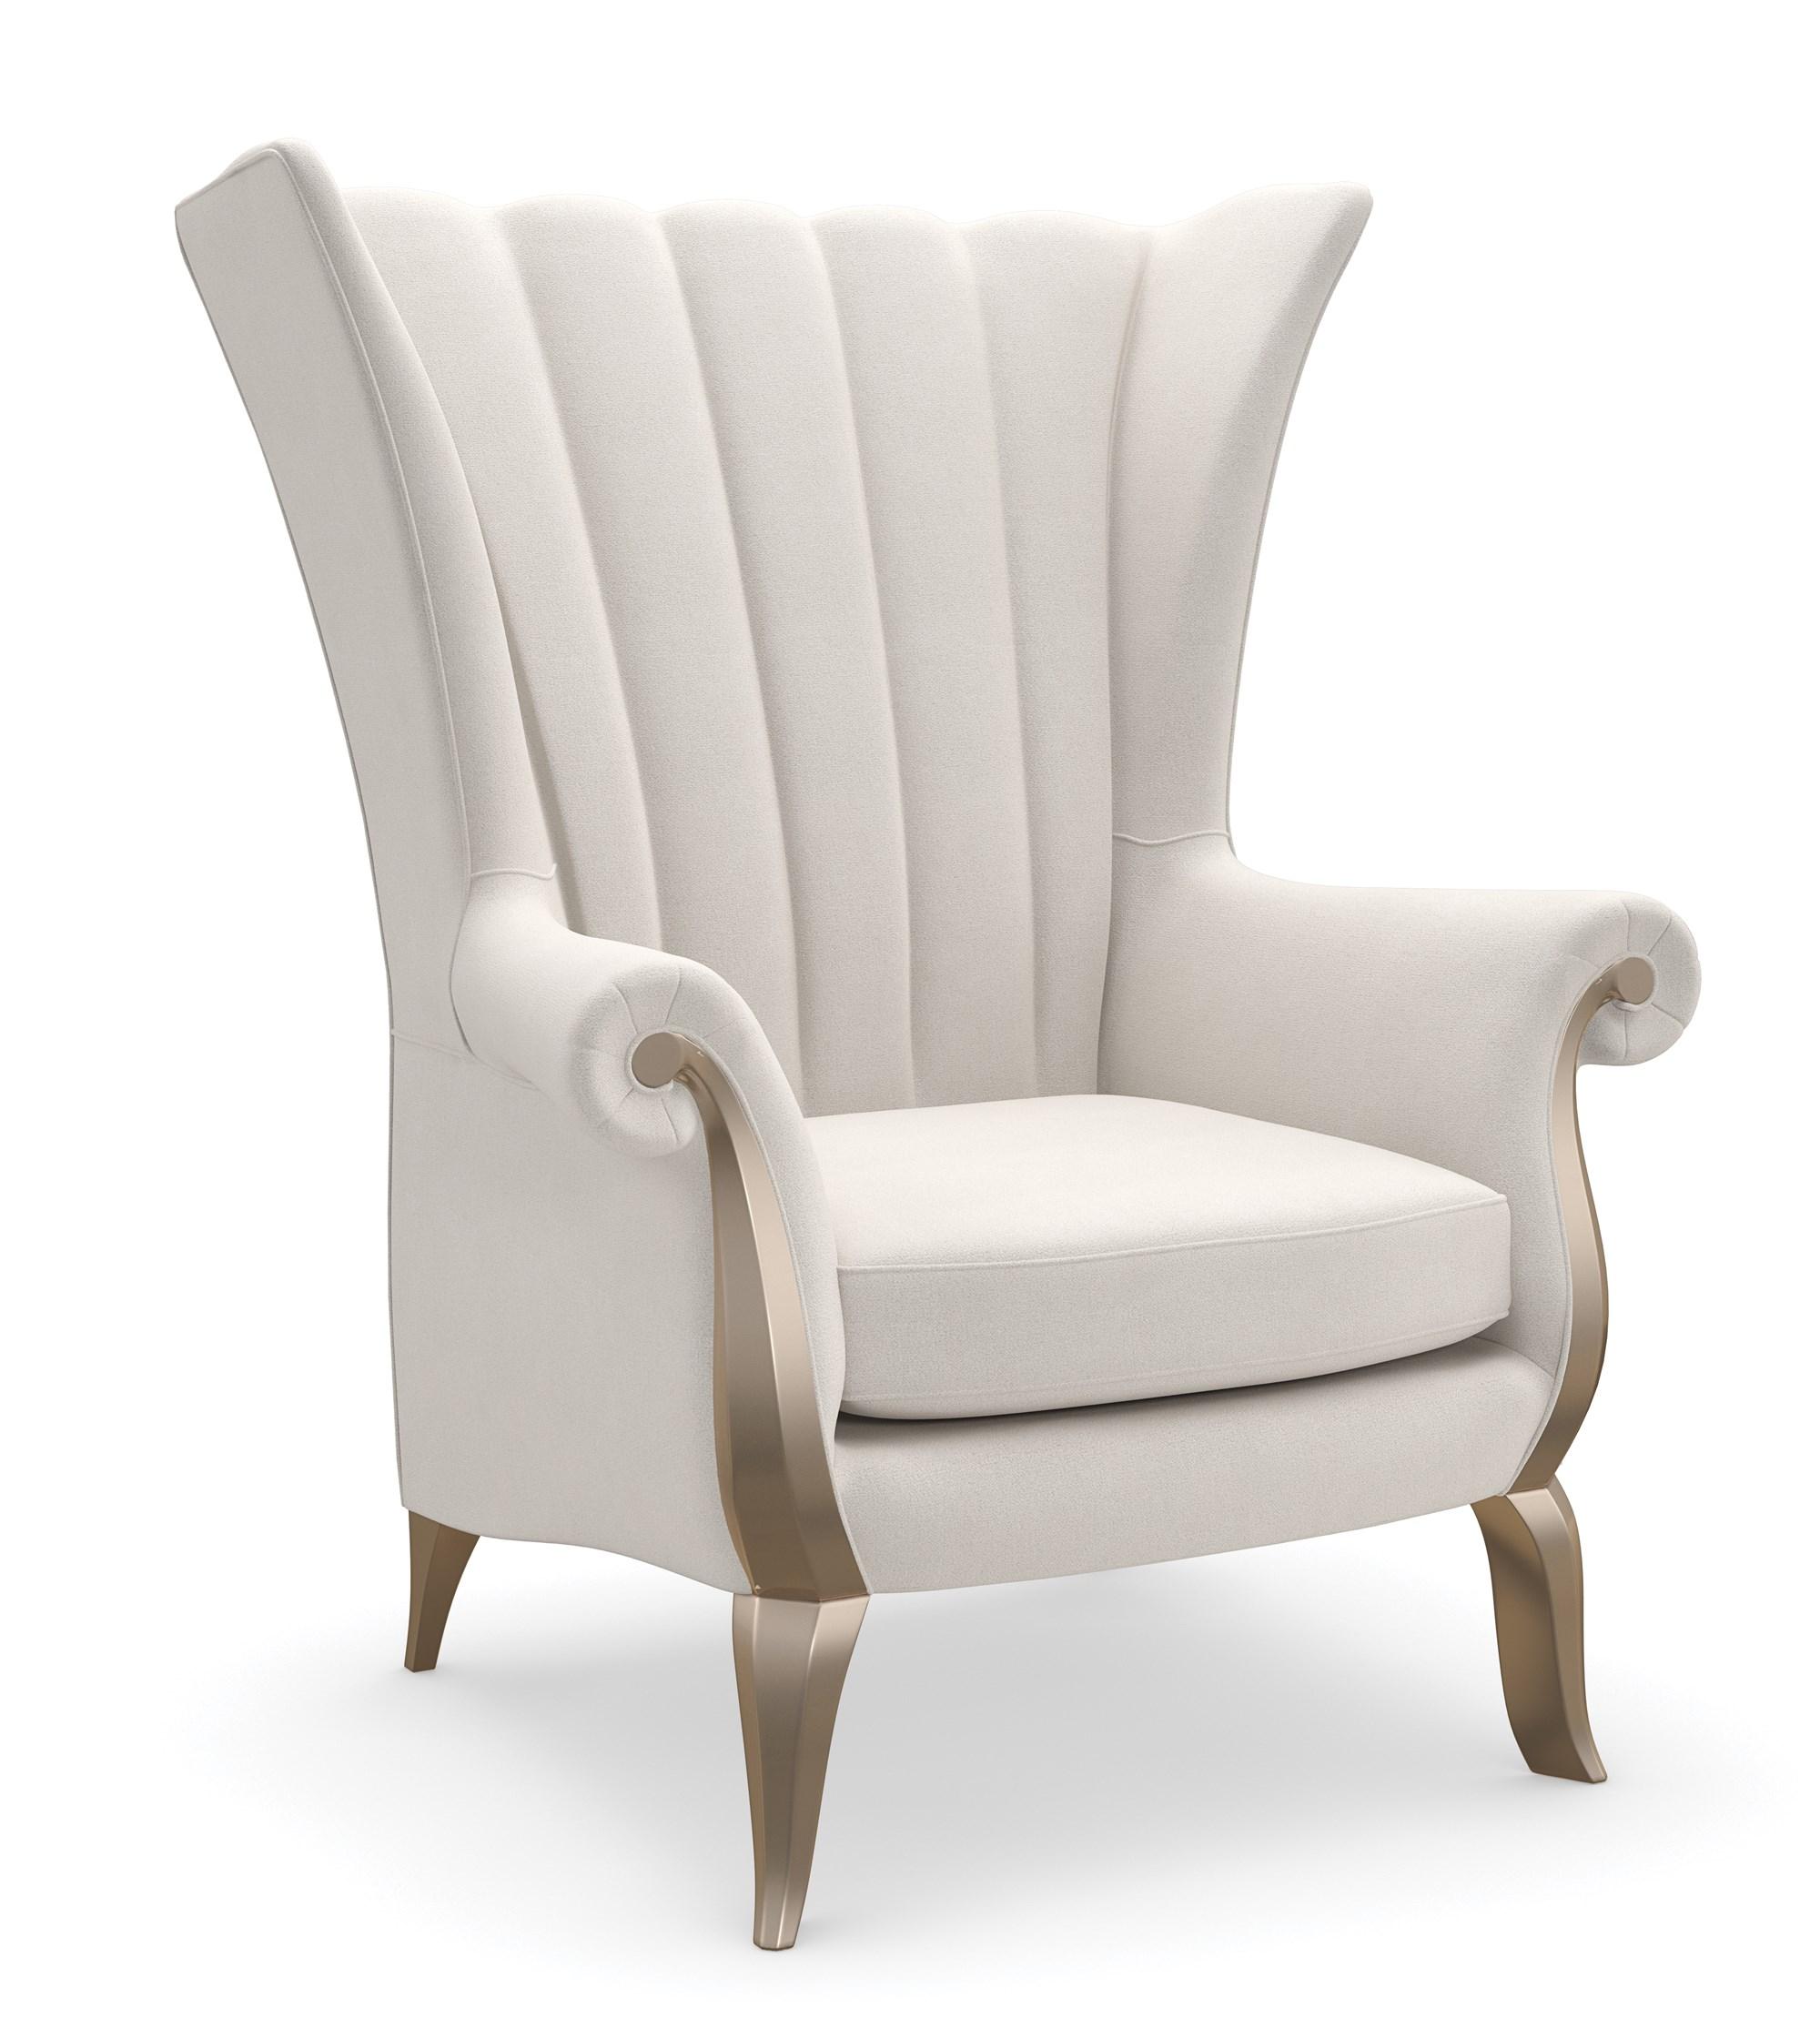 Traditional Accent Chair VALENTINA ACCENT CHAIR C110-422-032-A in Cream, Gold Fabric